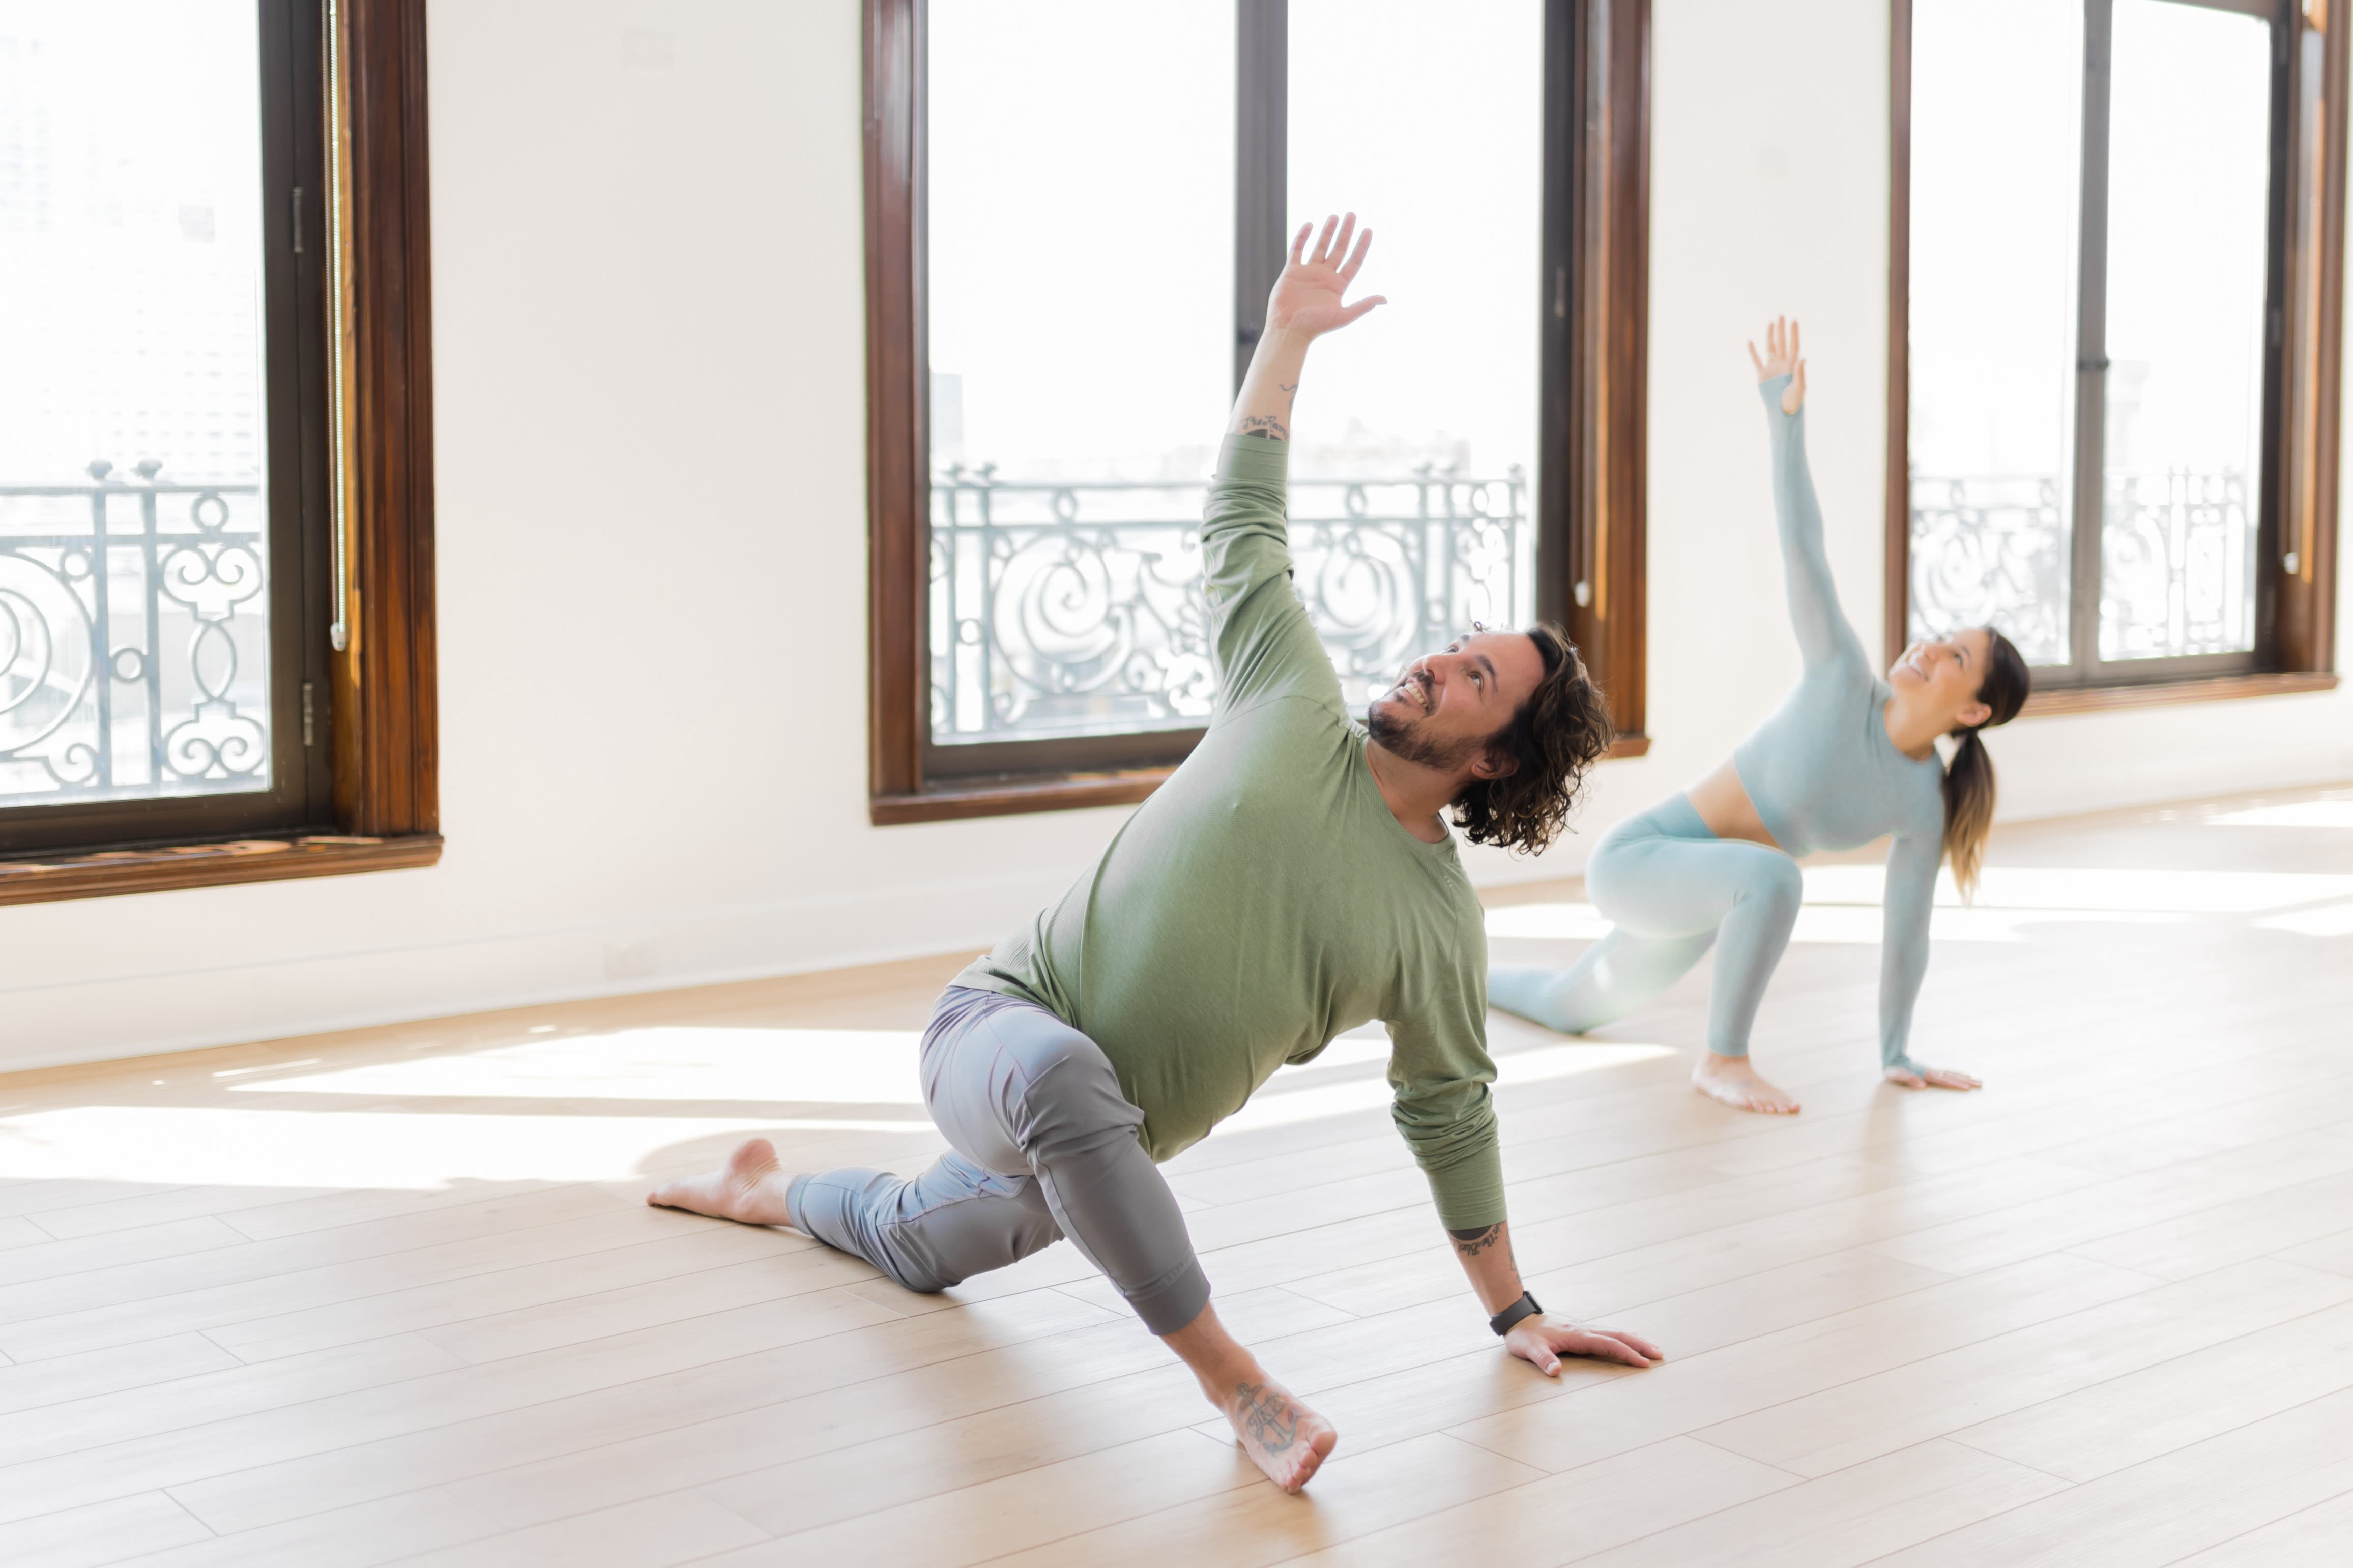 Yoga Renew: Read Reviews and Book Classes on ClassPass